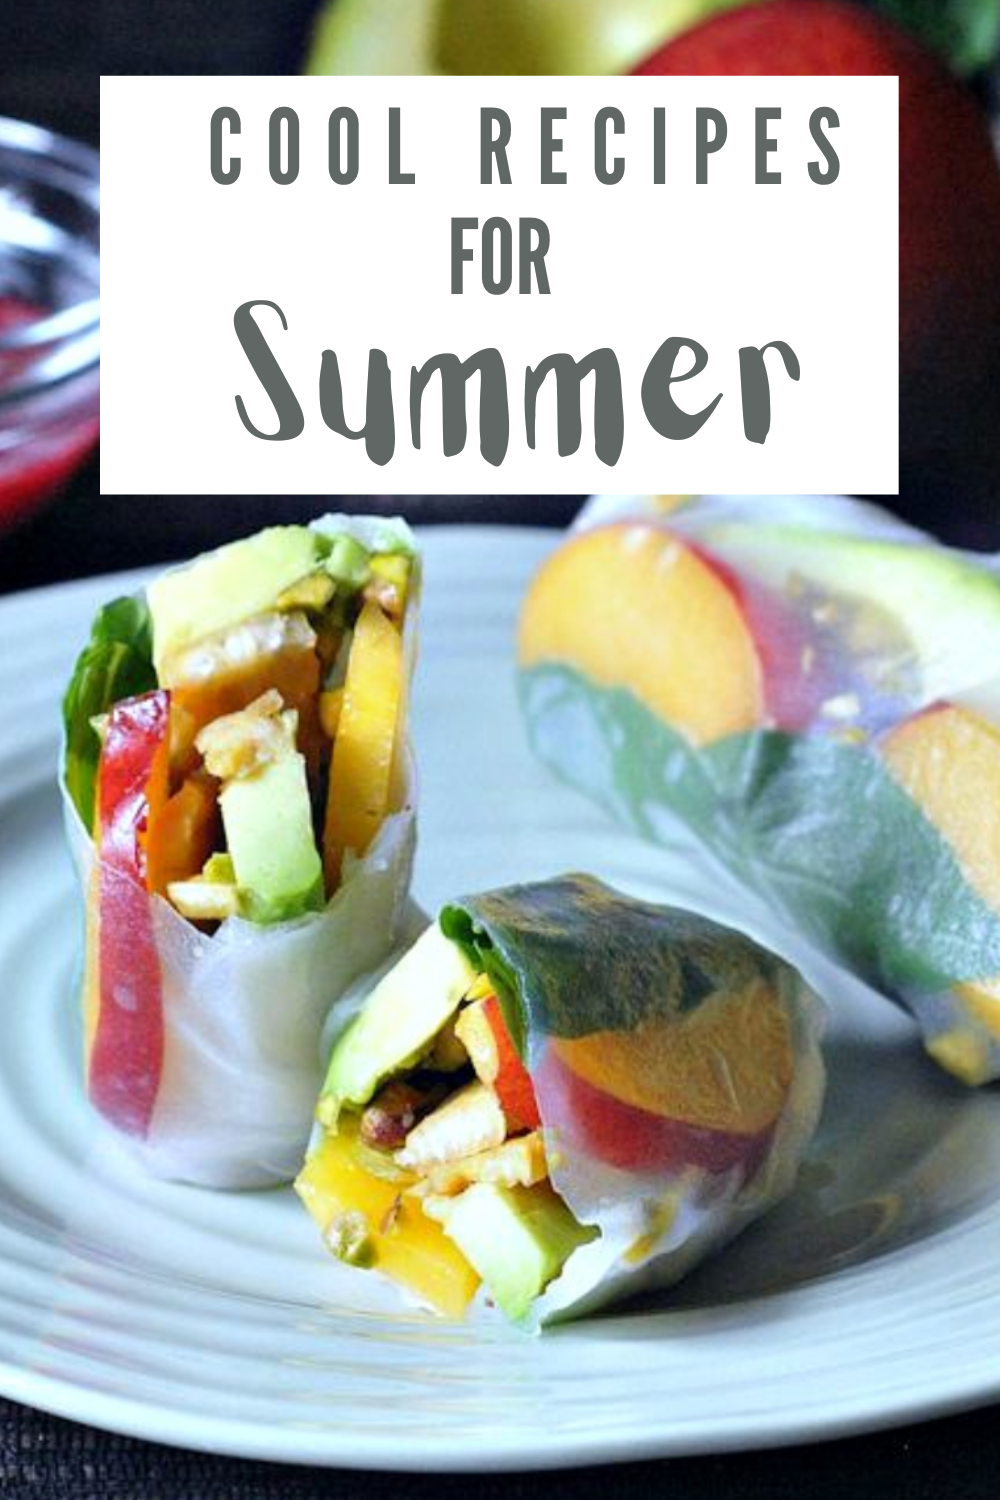 brightly colored summer rolls on a light blue plate (clear rice paper rolls with green avocado, red nectarine, yellow pepper). text across top of image reads "cool recipes for summer"